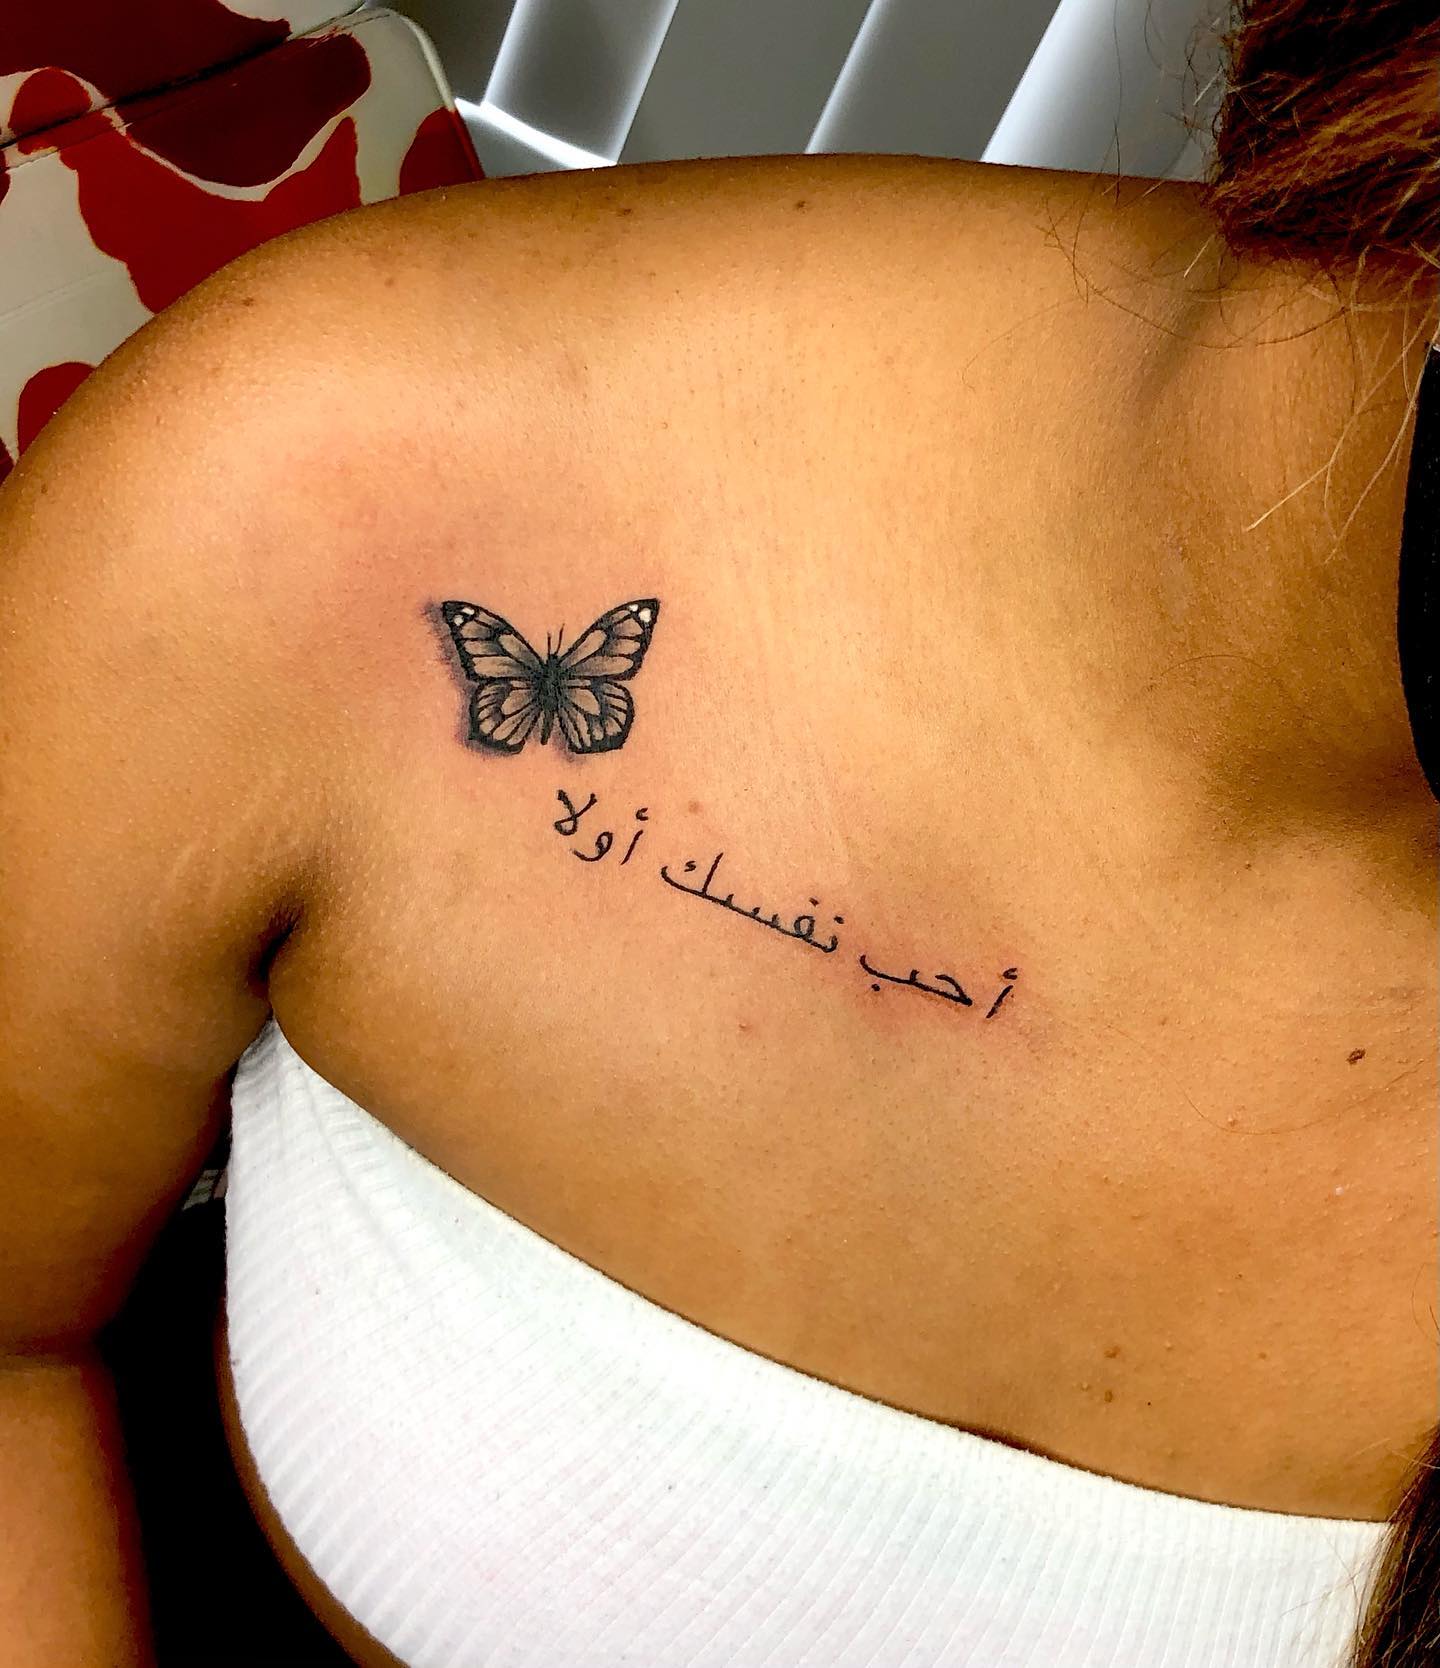 In order to love somebody, you should love yourself first. Get an Arabic tattoo that means 